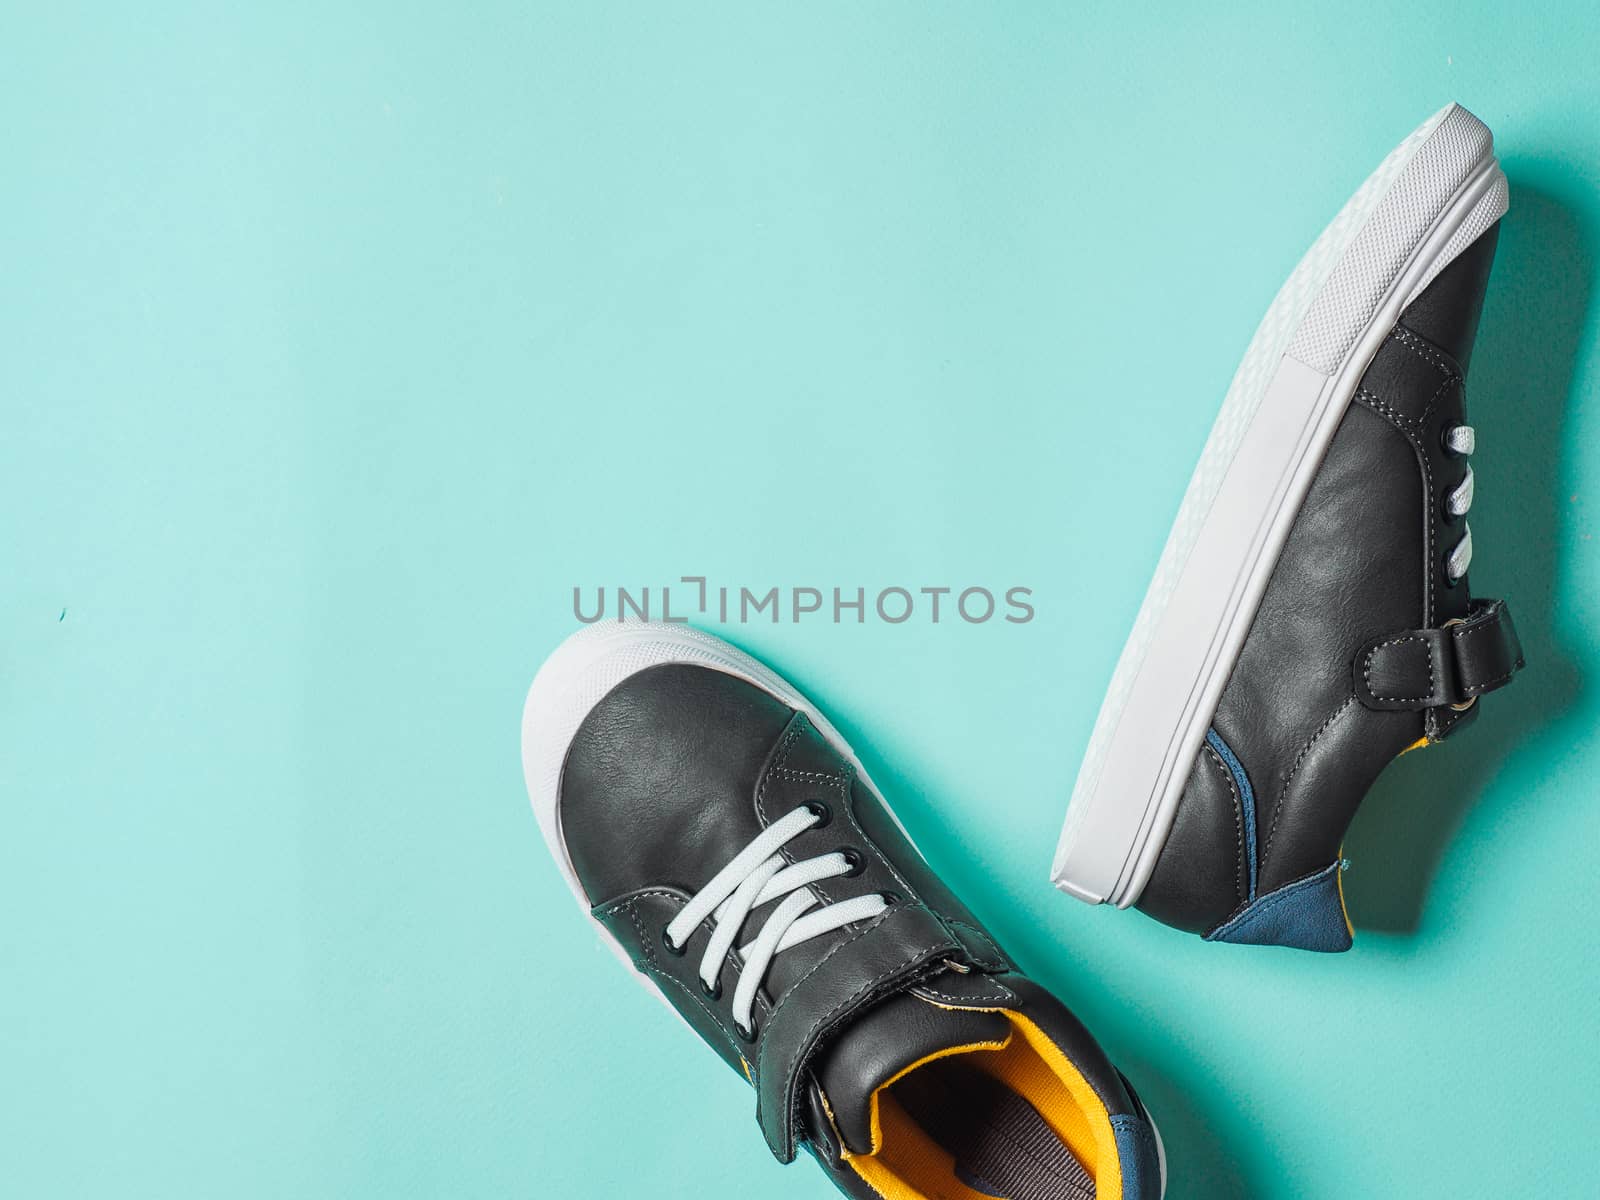 pair of new kids or adult sneakers on blue background, top view. Flat lay gray and yellow or mustard color sneakers shoes on colorful bright blue background with copy space for text or design